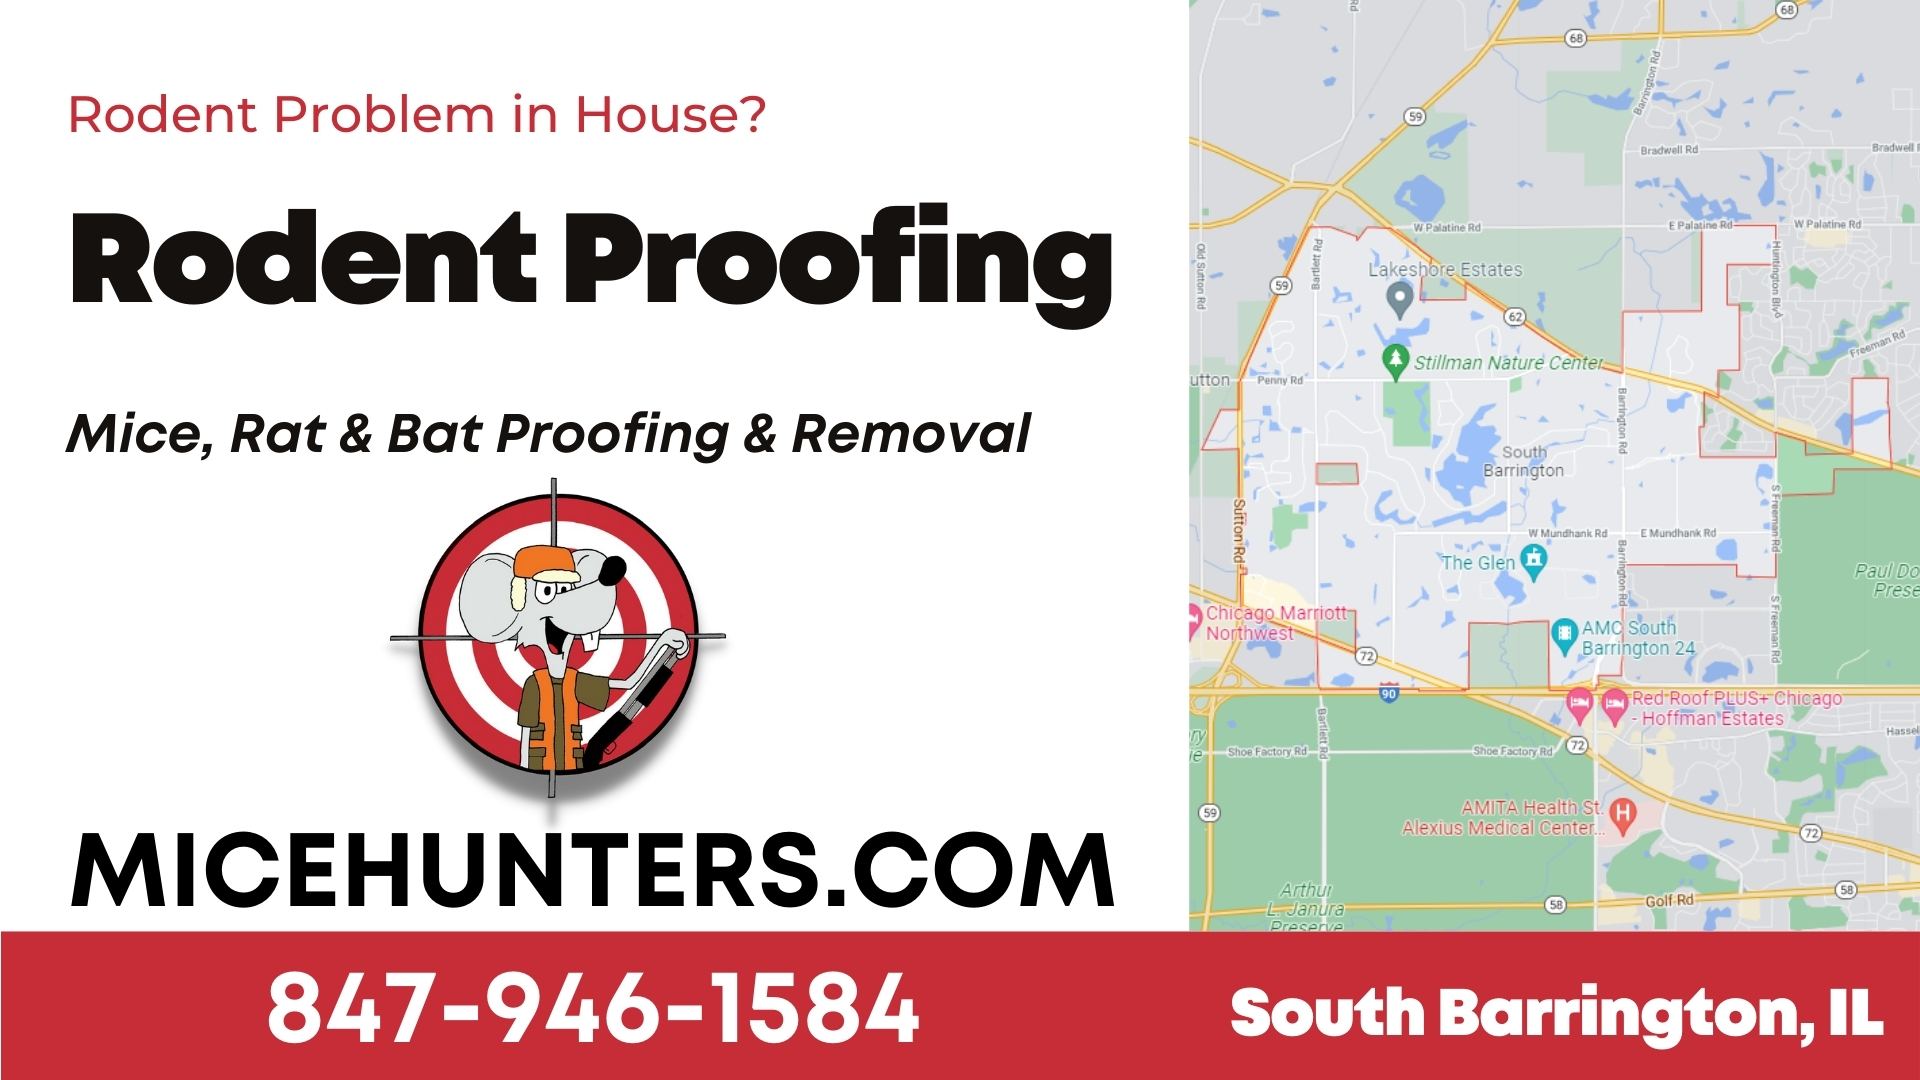 South Barrington Rodent and Mice Proofing Exterminator